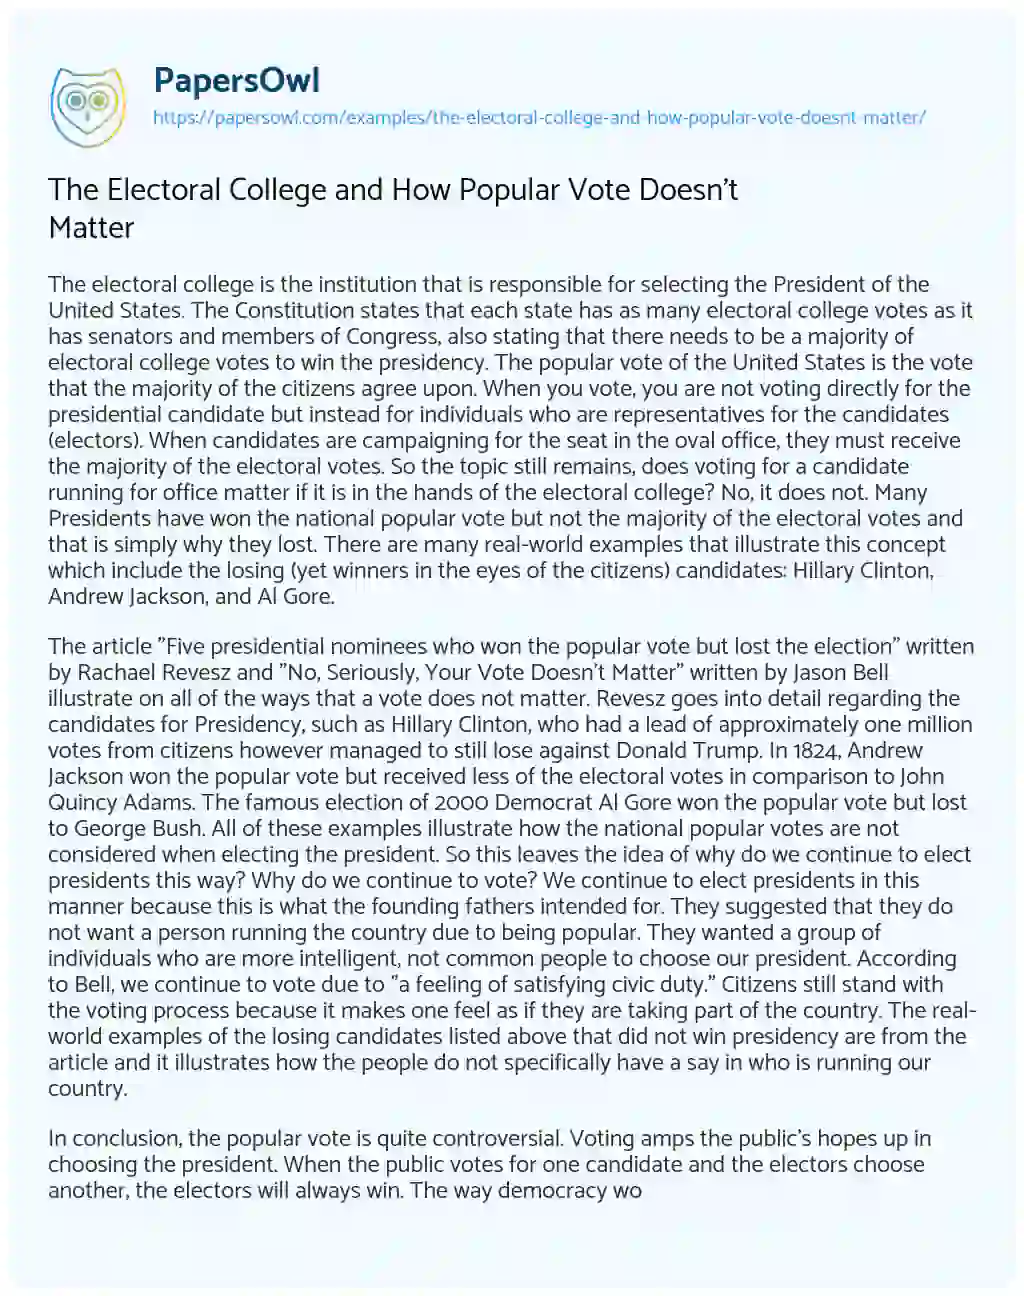 Essay on The Electoral College and how Popular Vote doesn’t Matter